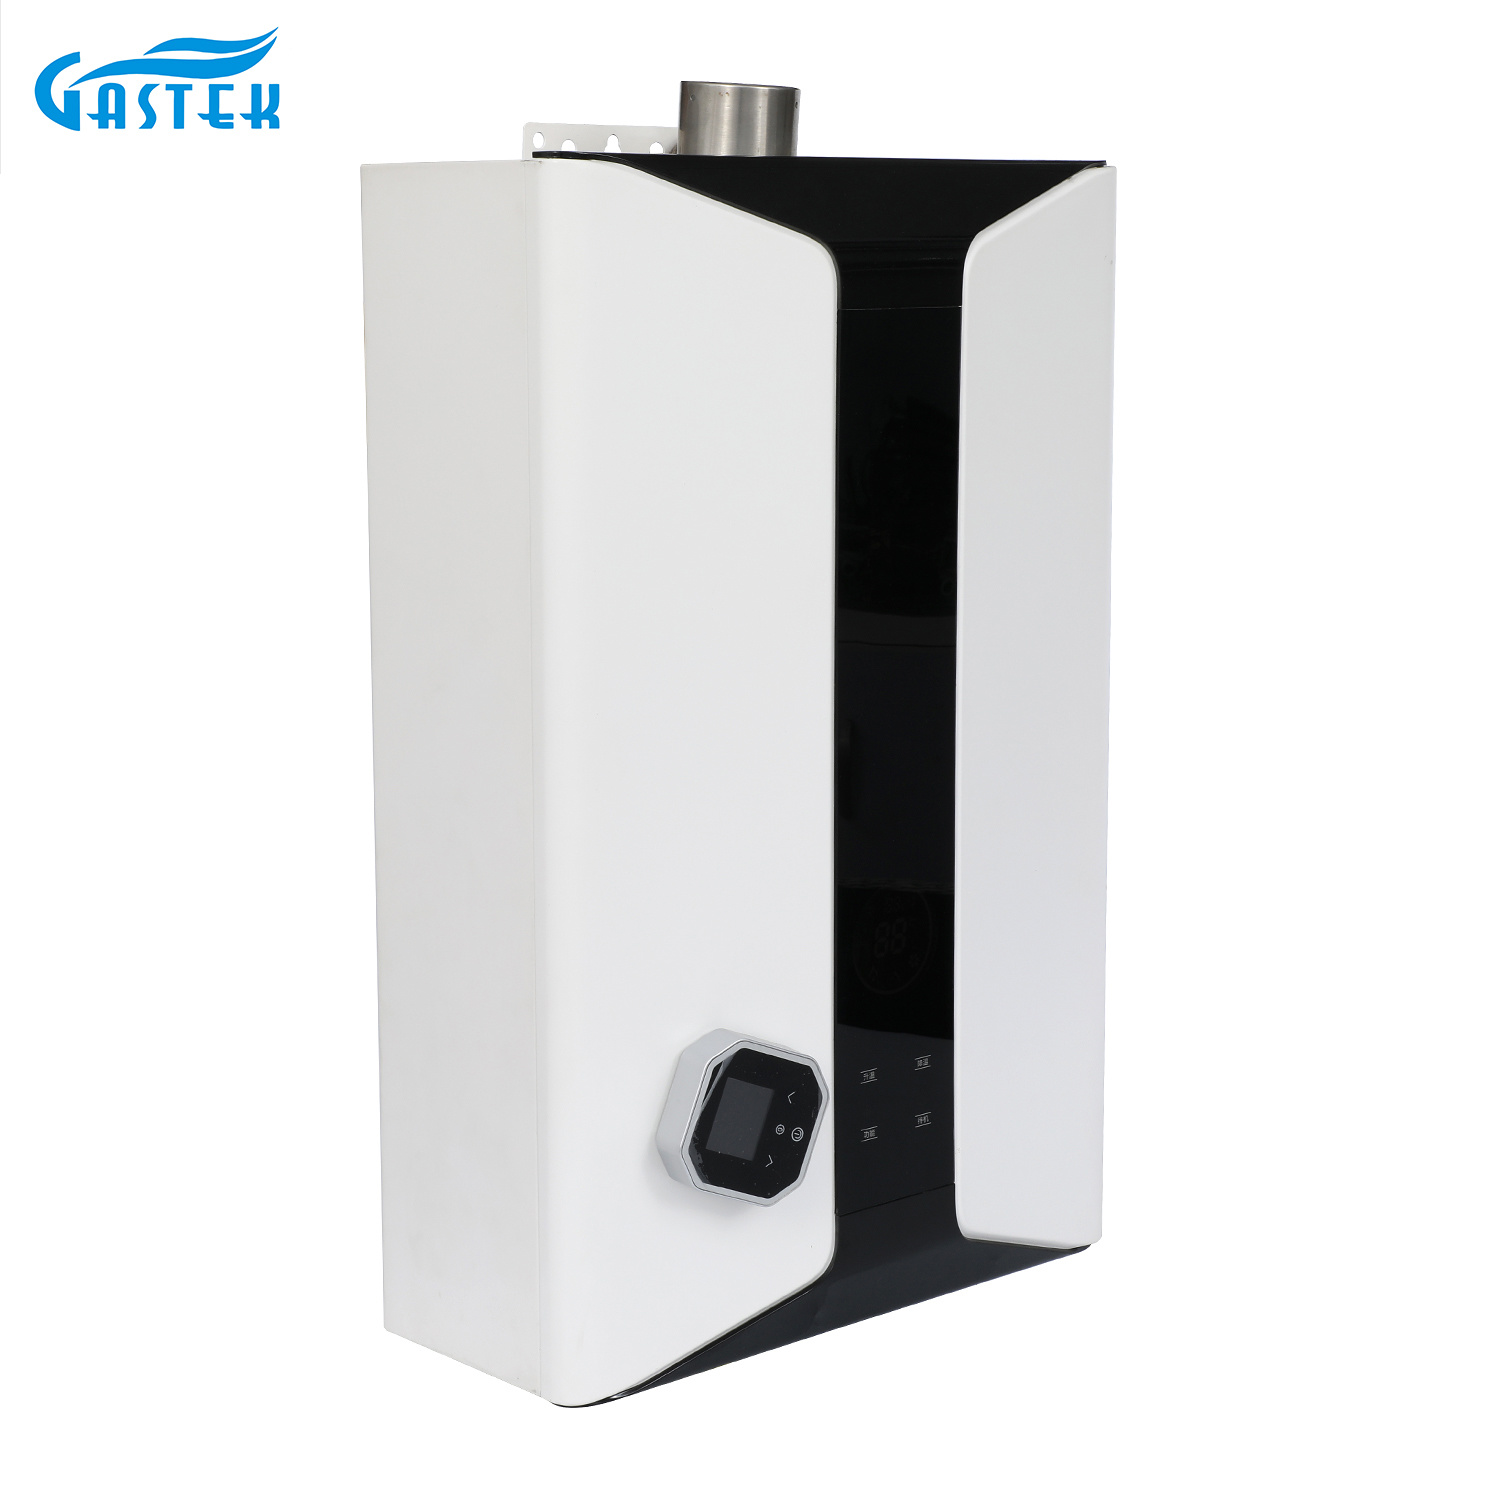 Electricity 220V 110V LCD Panel Forced Type Constant Temperature Gas Water Heater for Bathroom